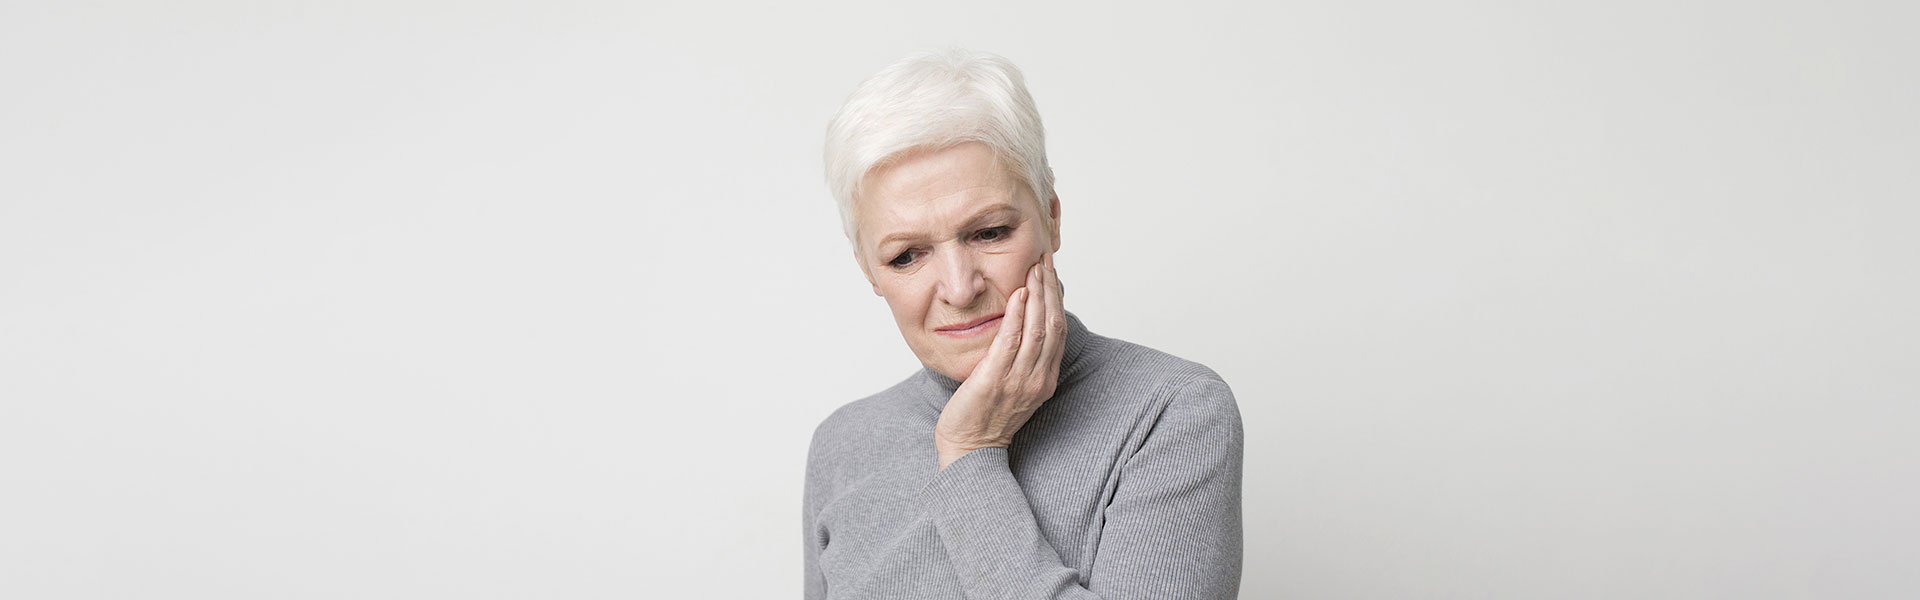 Can You Get Dental Implants if You Have Gum Disease?